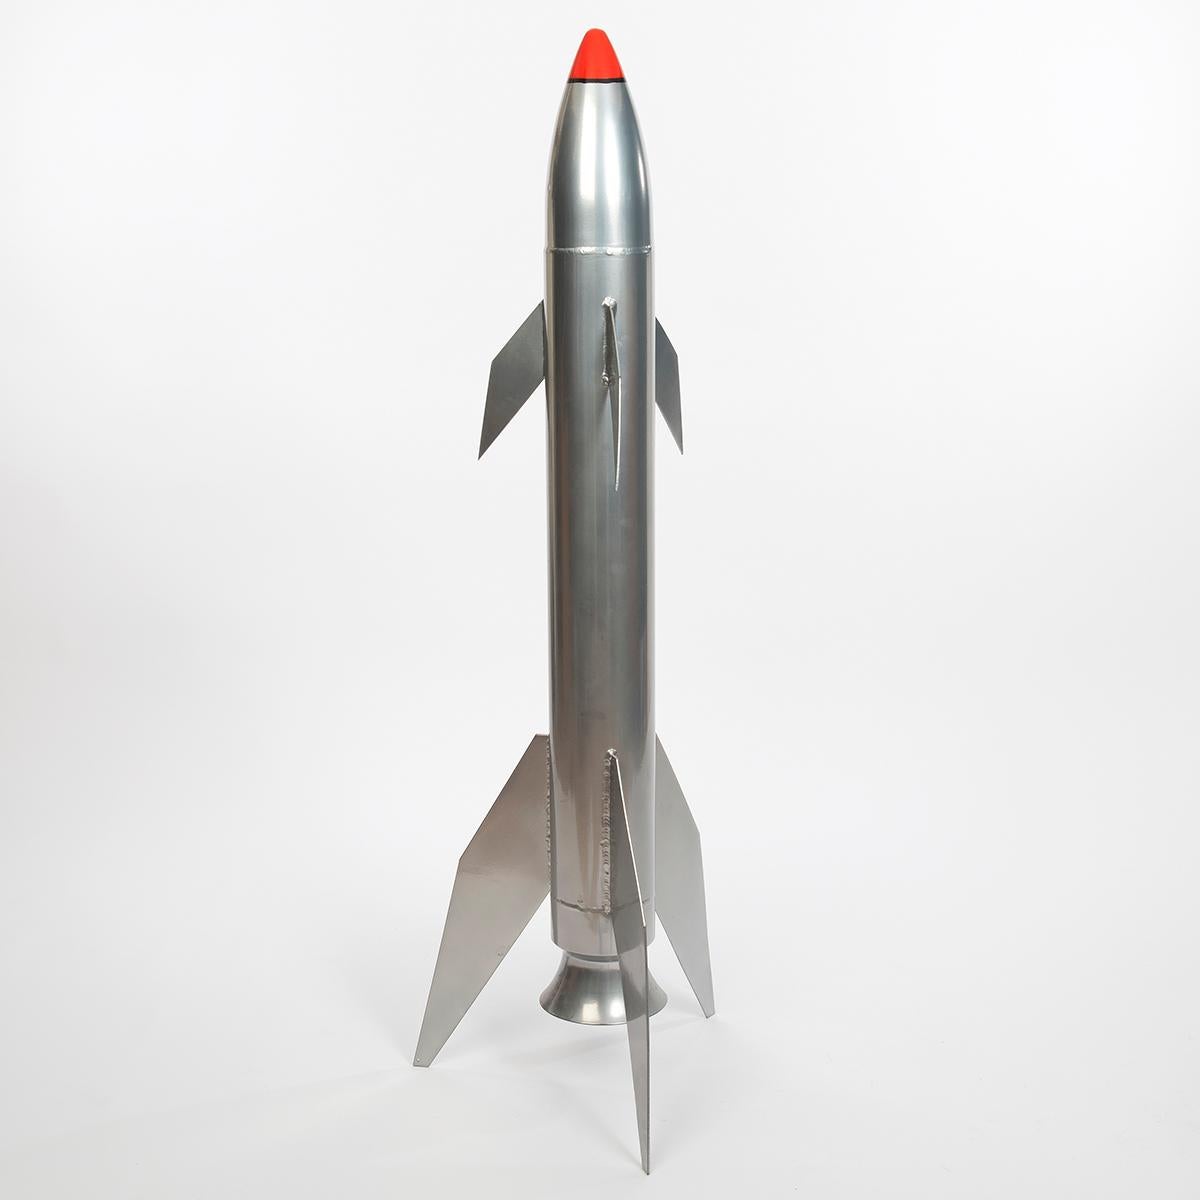 Our missile is a mock up, made by a university engineering team to demonstrate the complexity and skill involved to create and manufacture aluminium to aluminium welding. A great conversation starter.

Specification : 140cm high, 46cm wide and 40cm